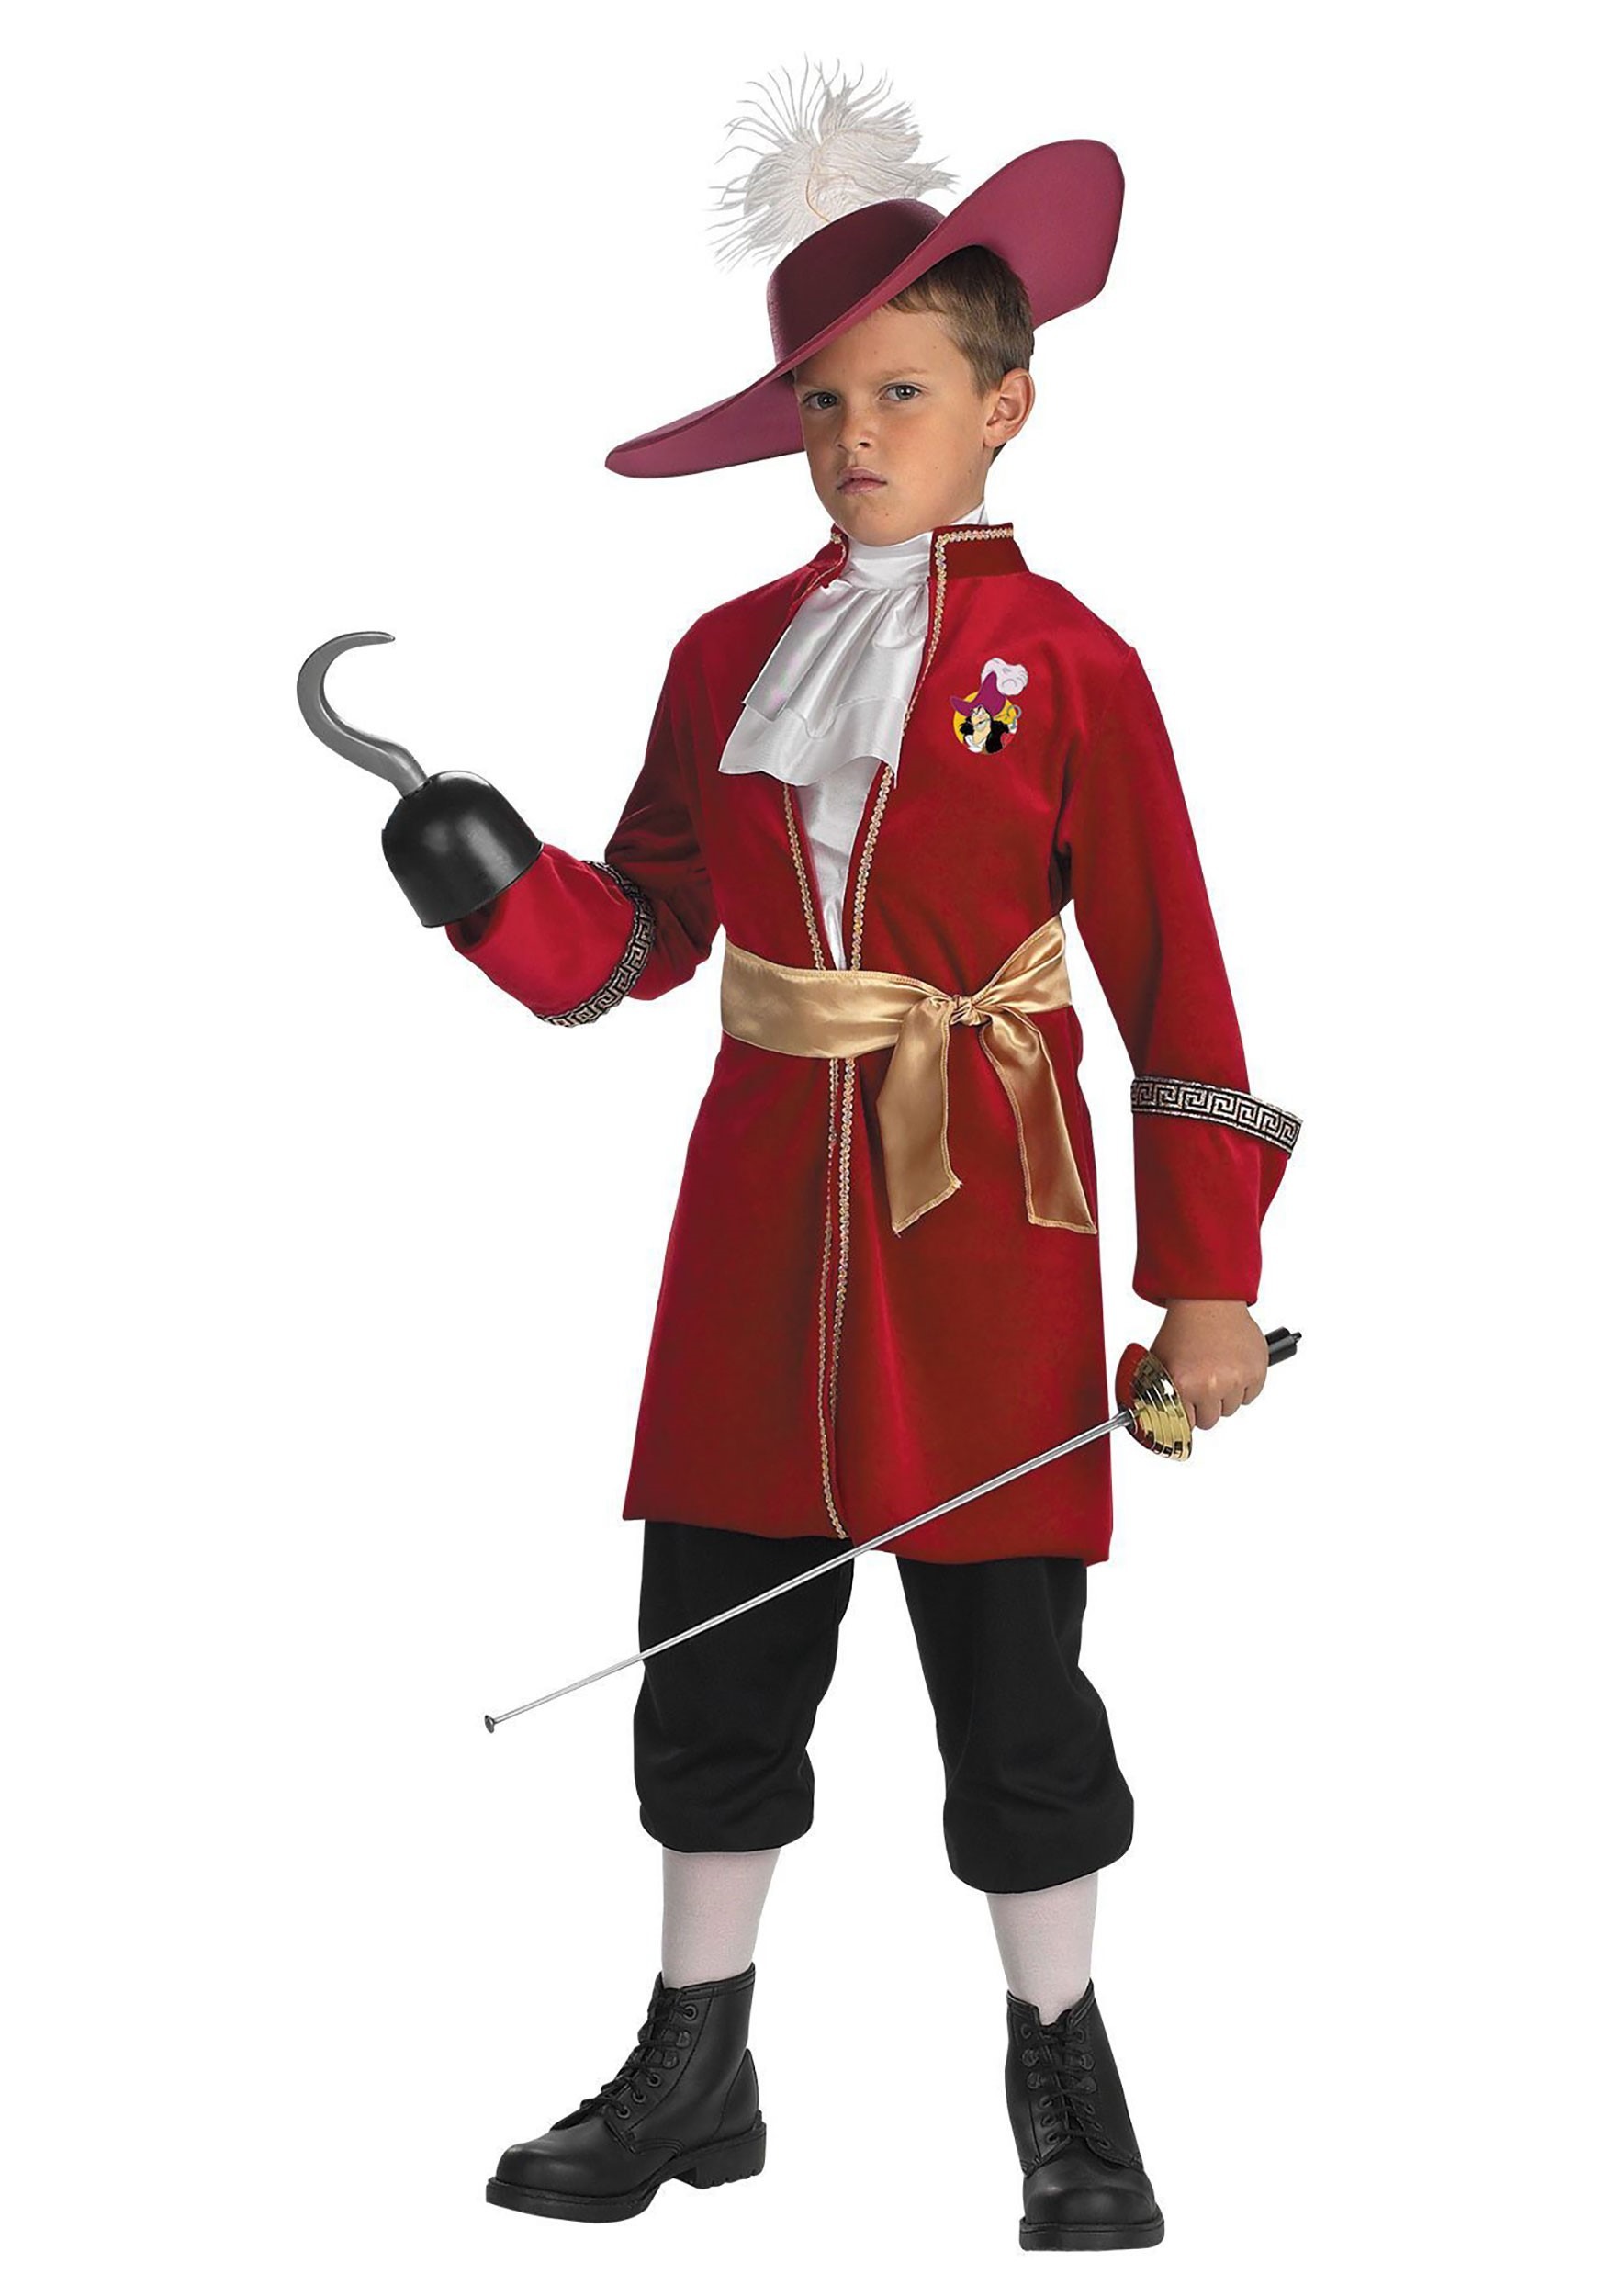 https://images.halloweencostumes.ca/products/3024/1-1/child-captain-hook-costume.jpg